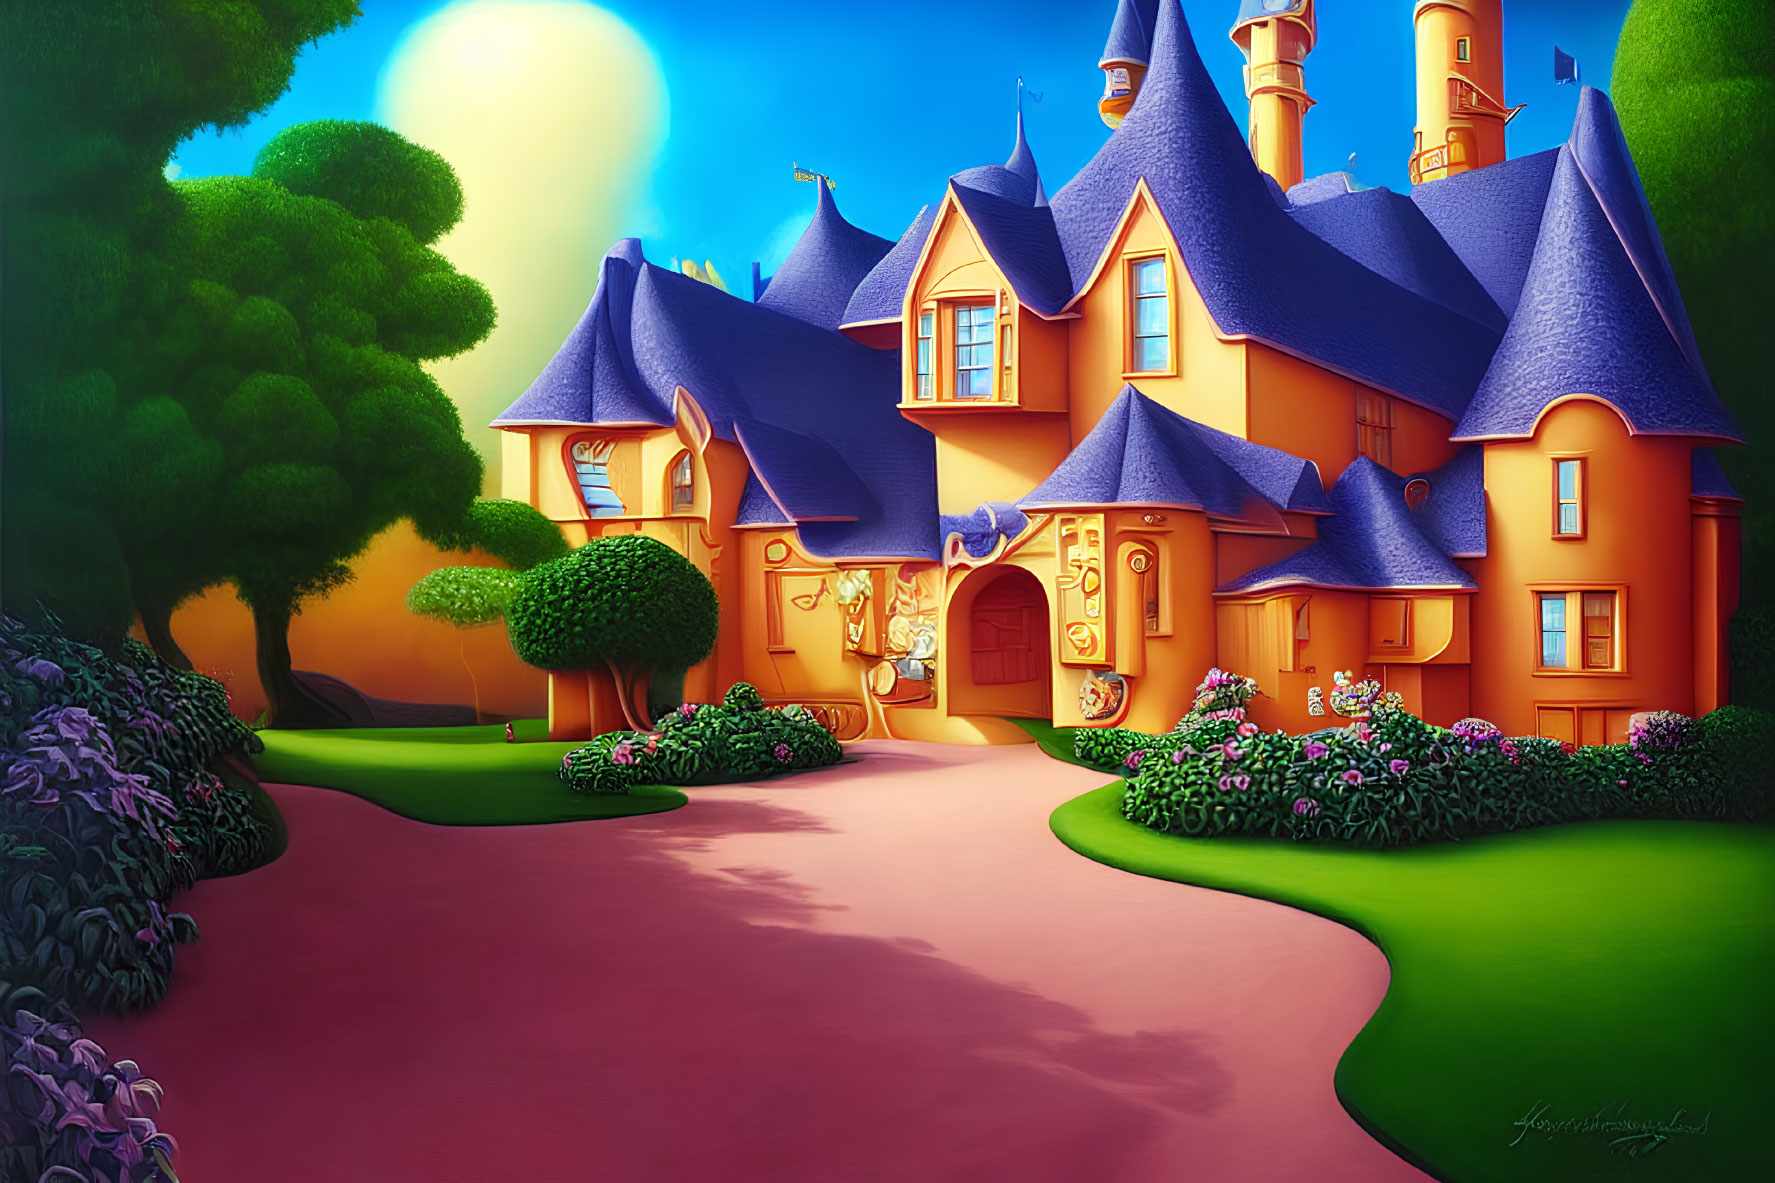 Colorful fantasy castle illustration with gardens and sun